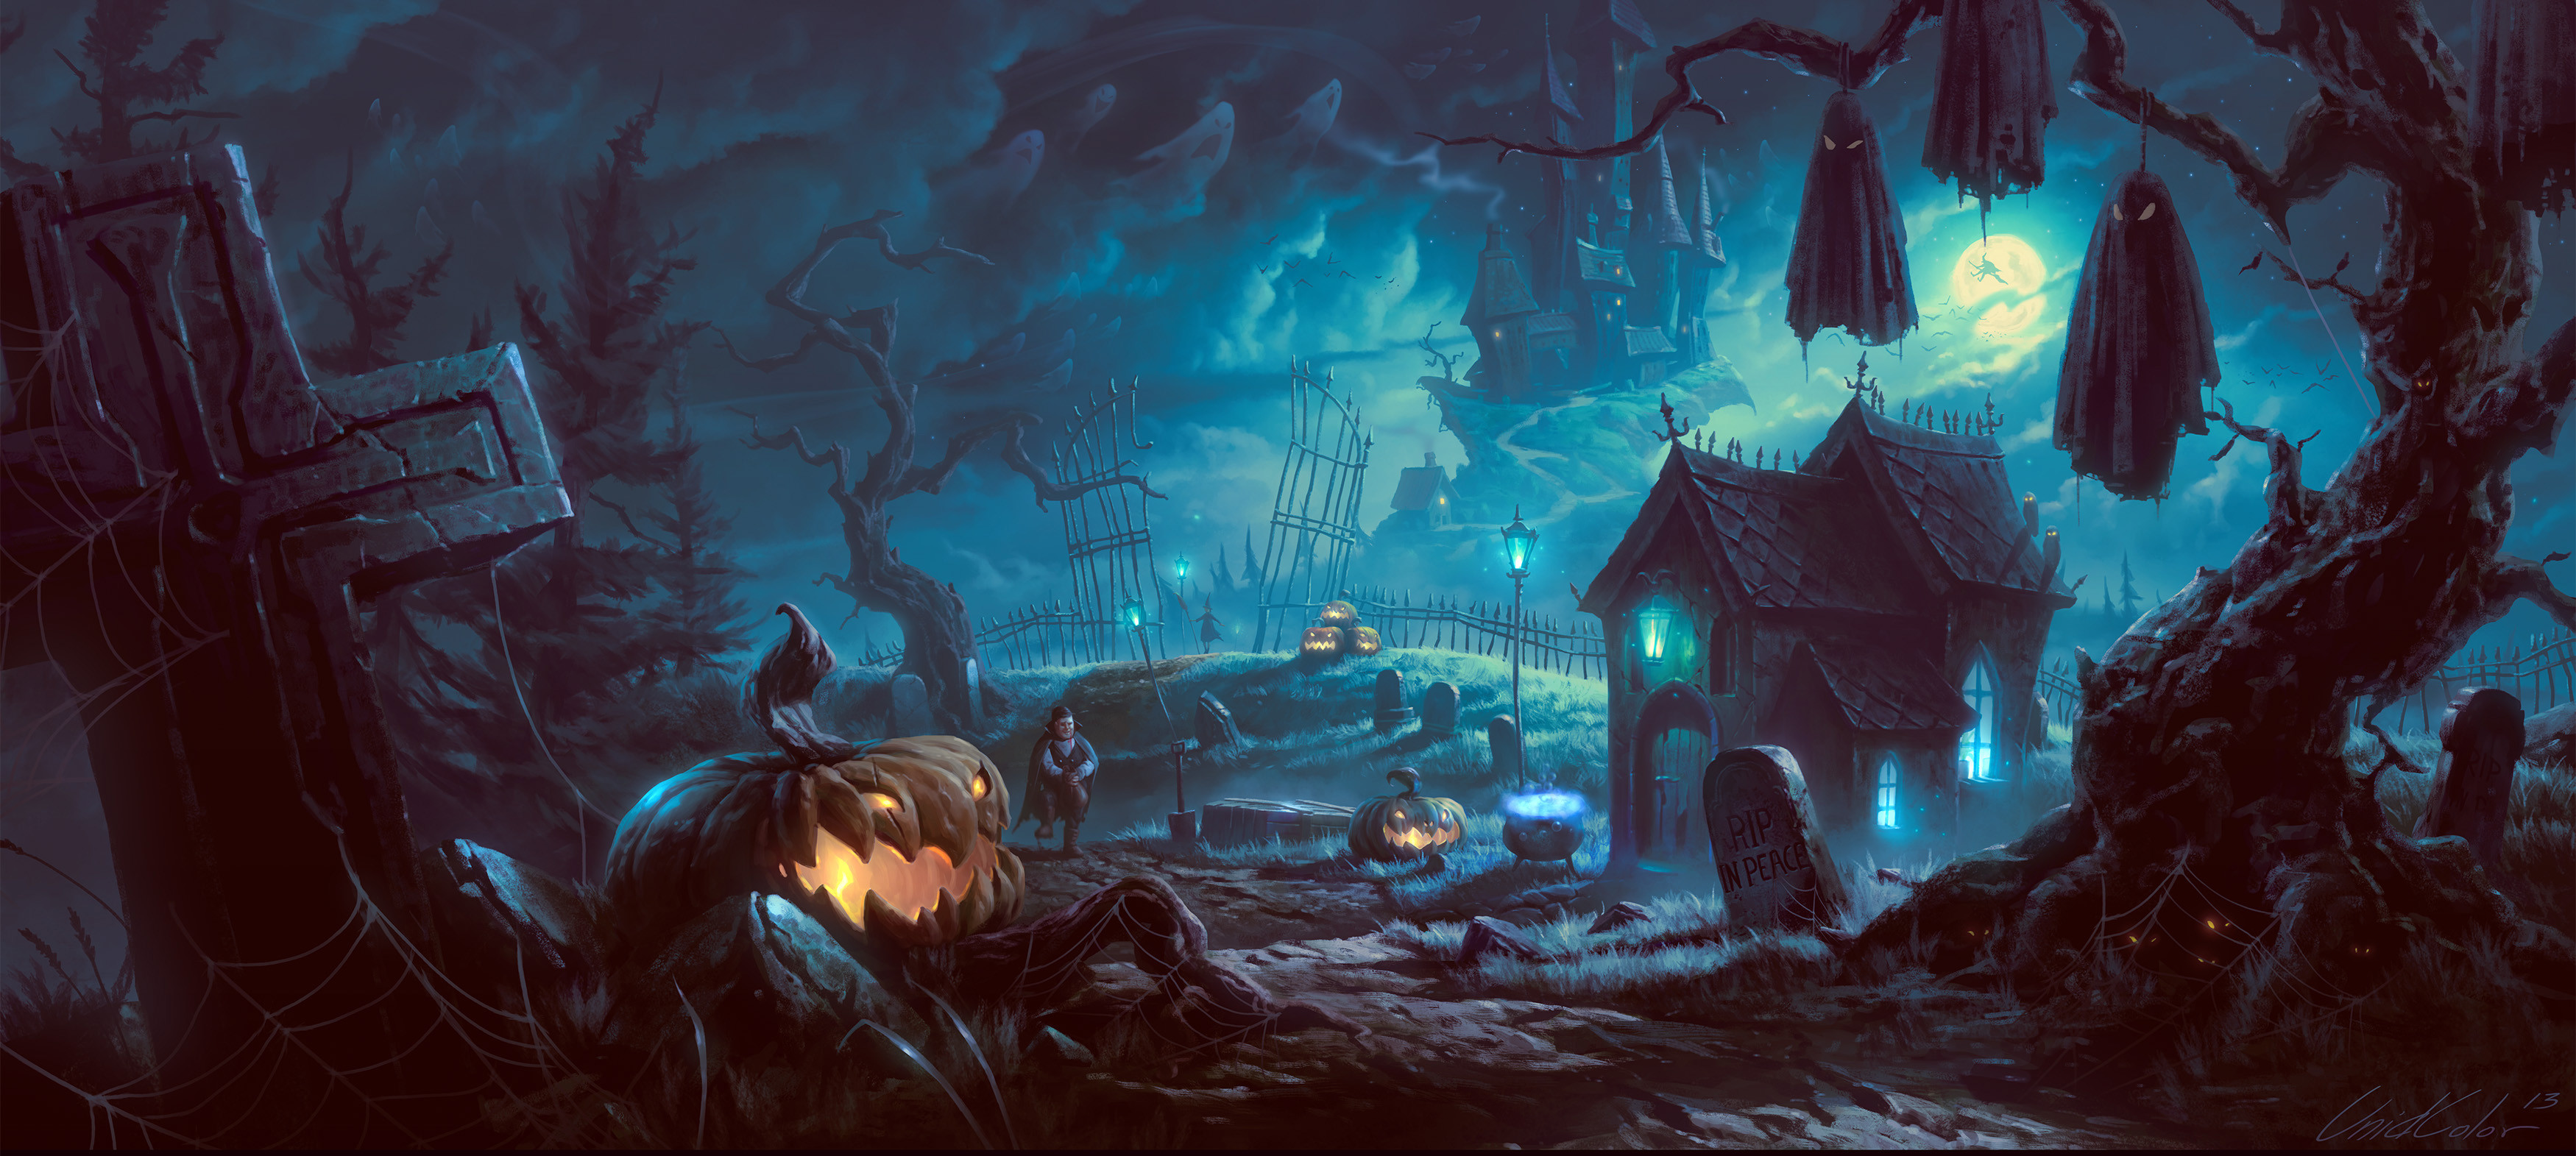 3500x1571 Halloween Backgrounds Hd - Page 3 - Bootsforcheaper.com